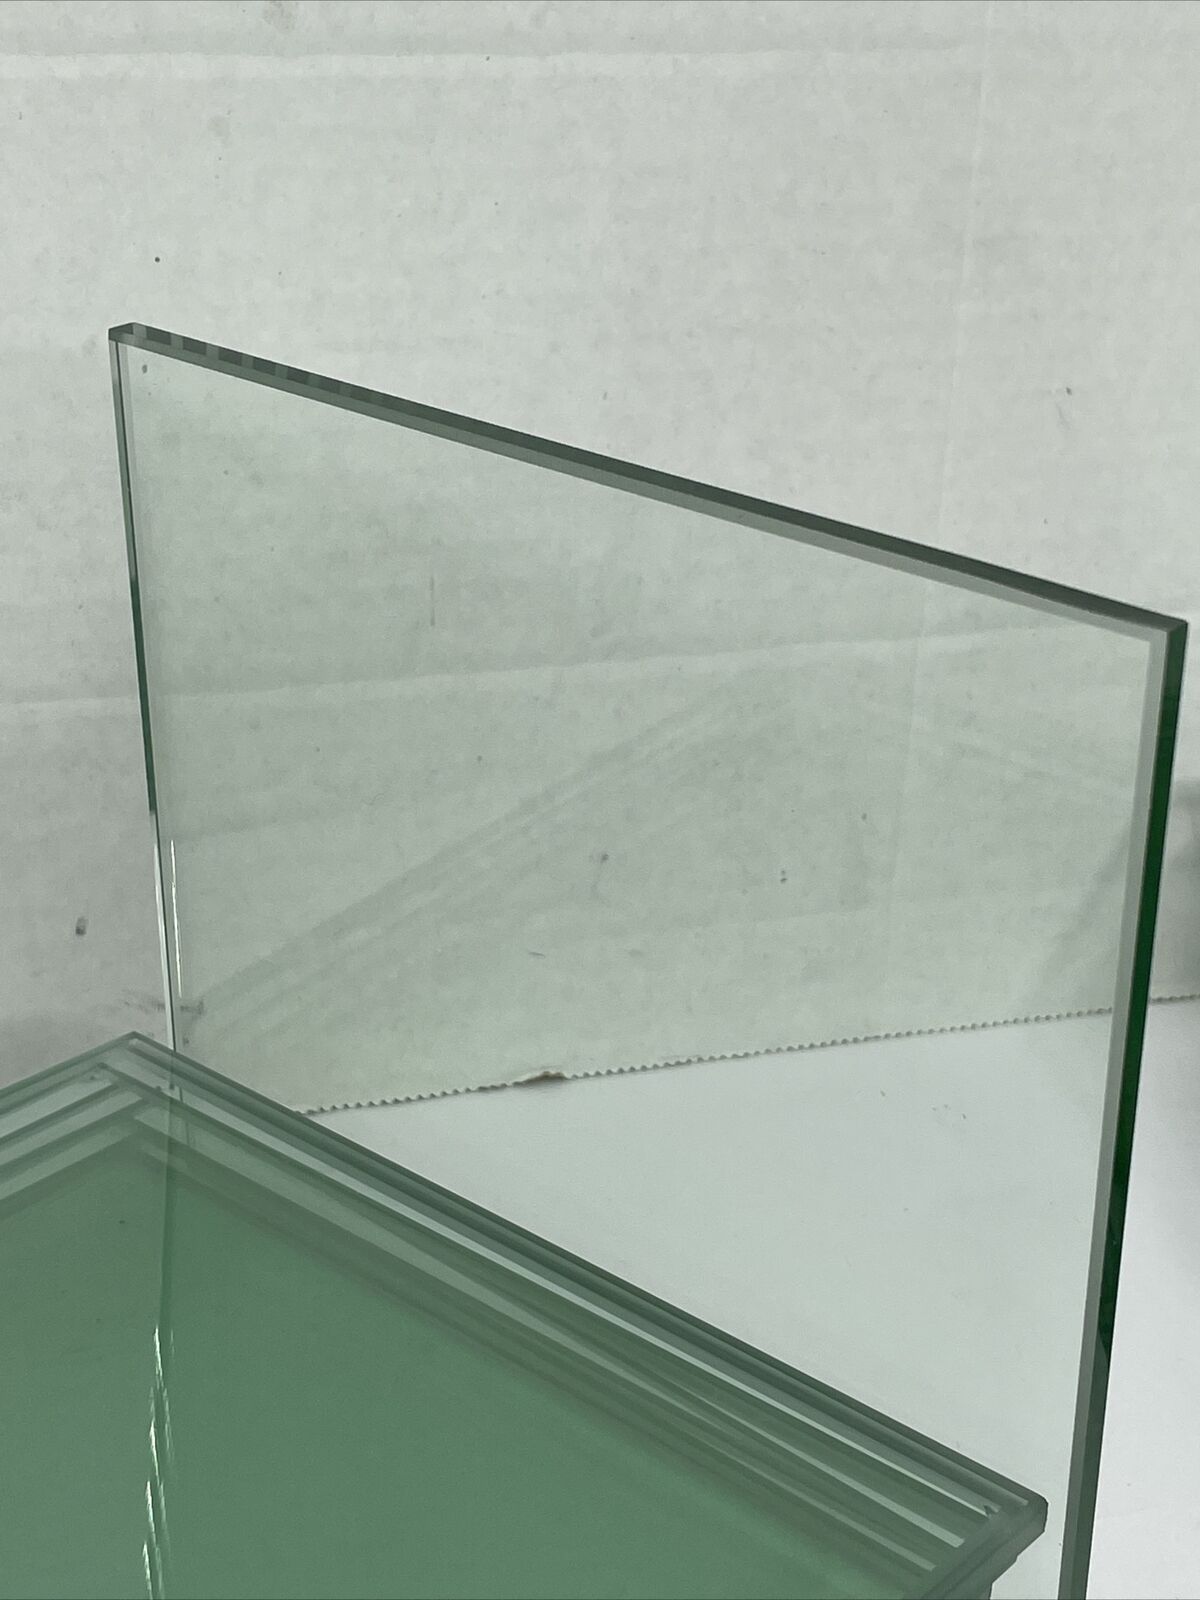 LOT OF 30 -  Square Clear Glass 6" x 6" (nominal) x 6mm Thick - Flat Polish Edge Unbranded Does Not Apply - фотография #4